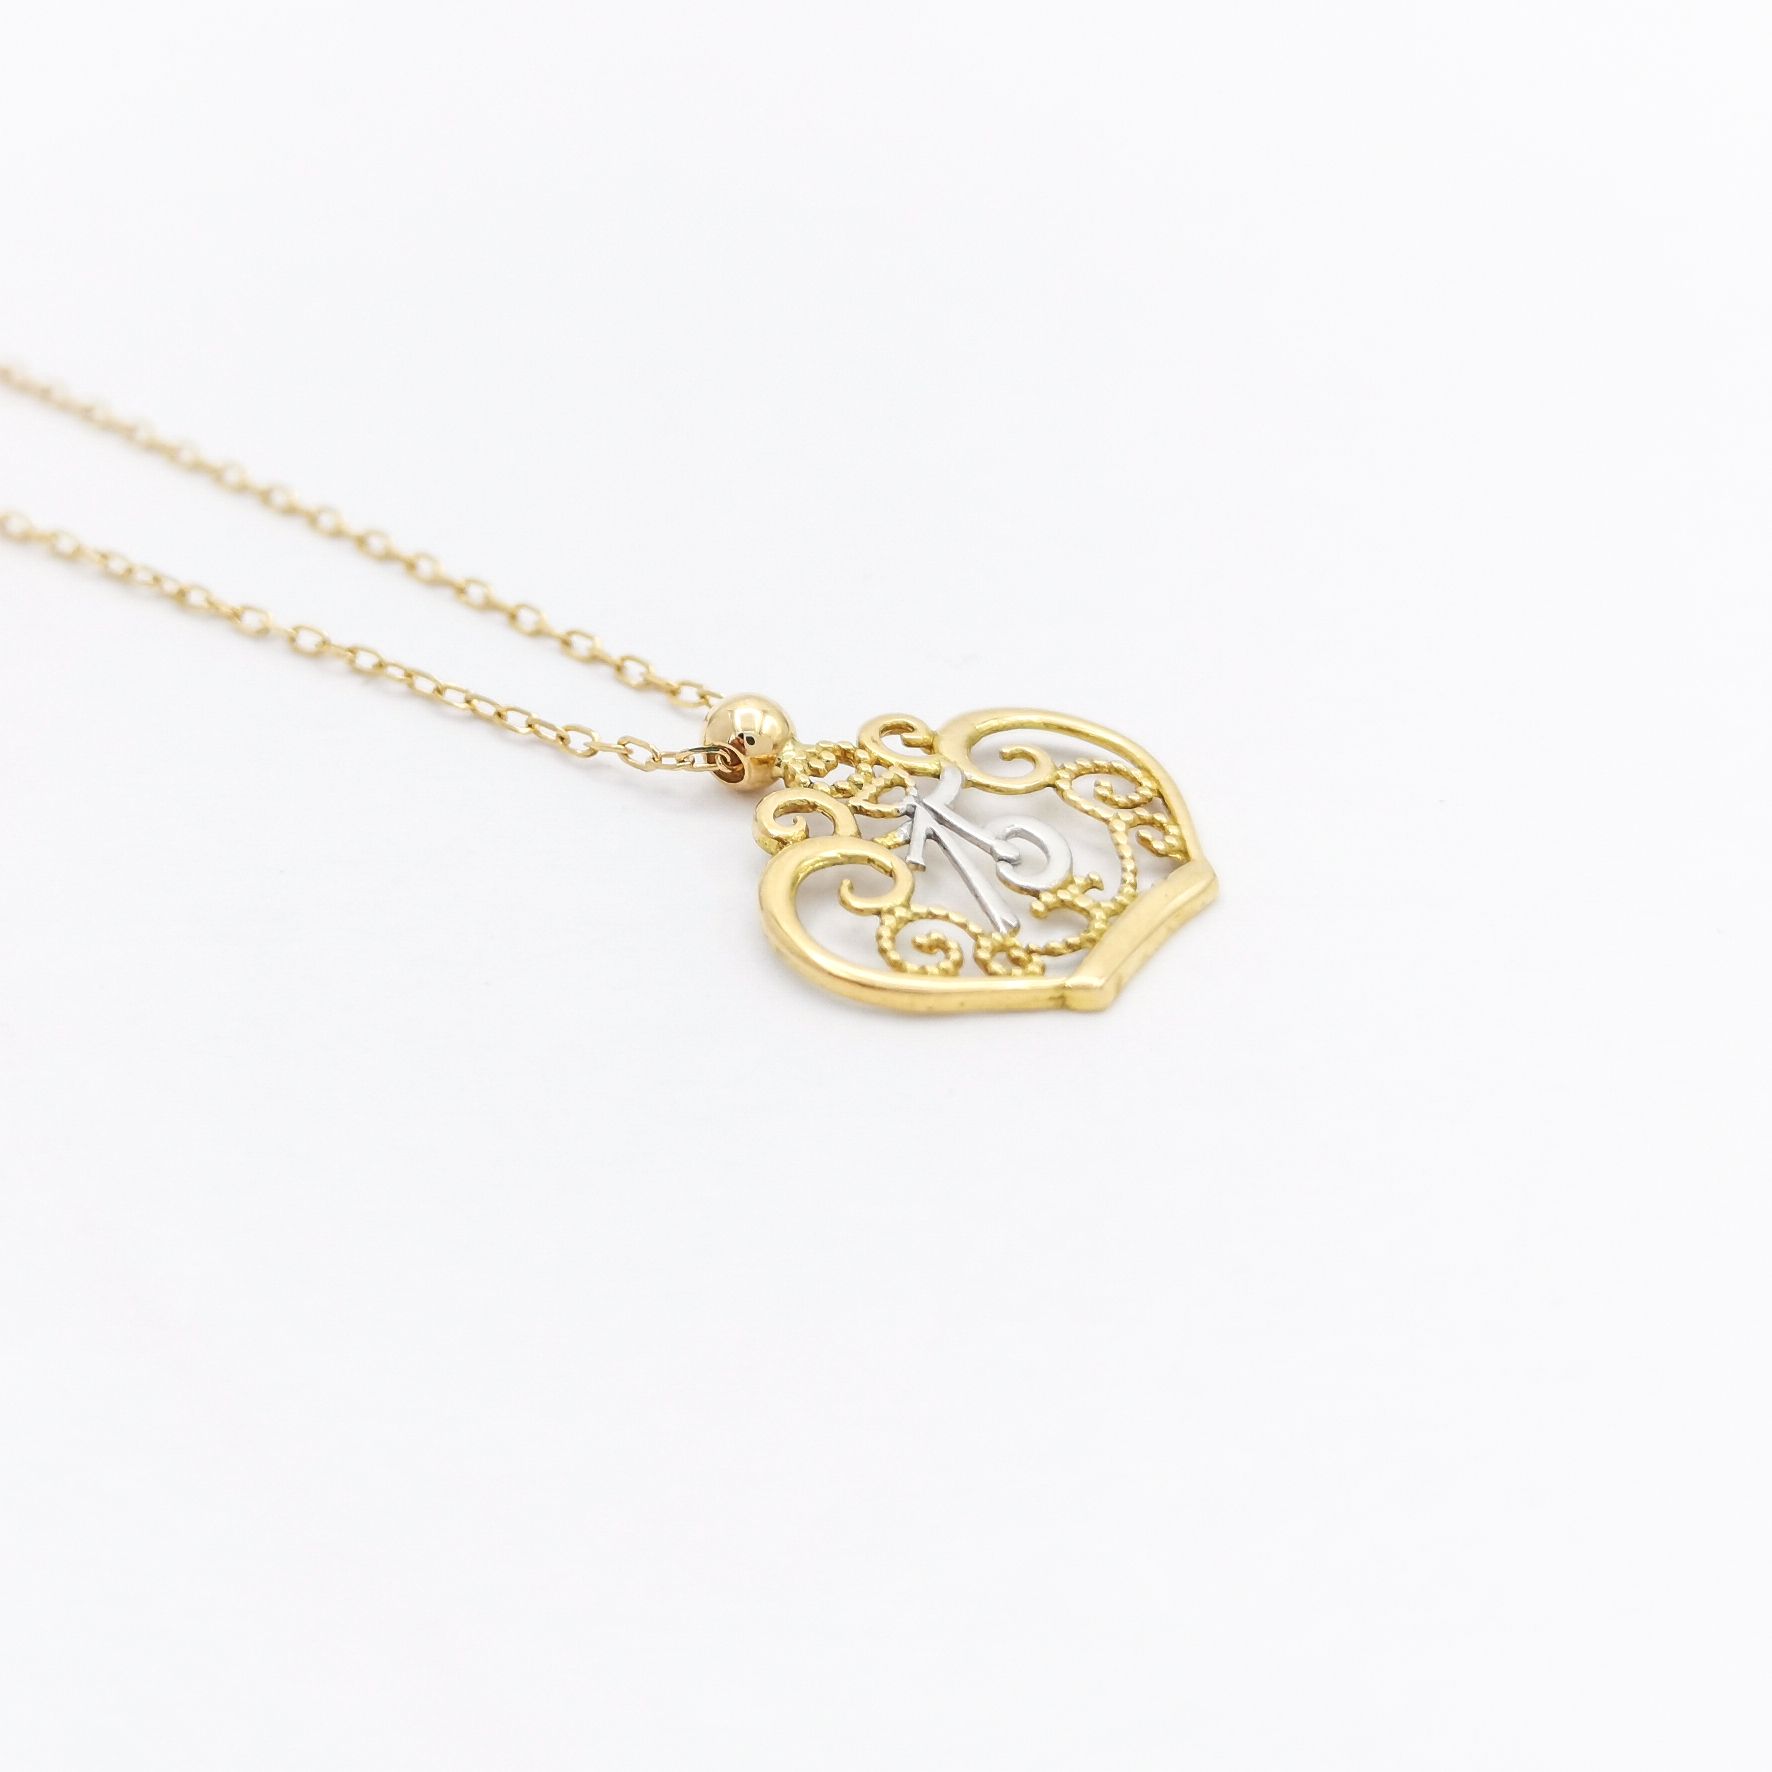 18K Yellow Gold Pendant with Chain [XN-587]